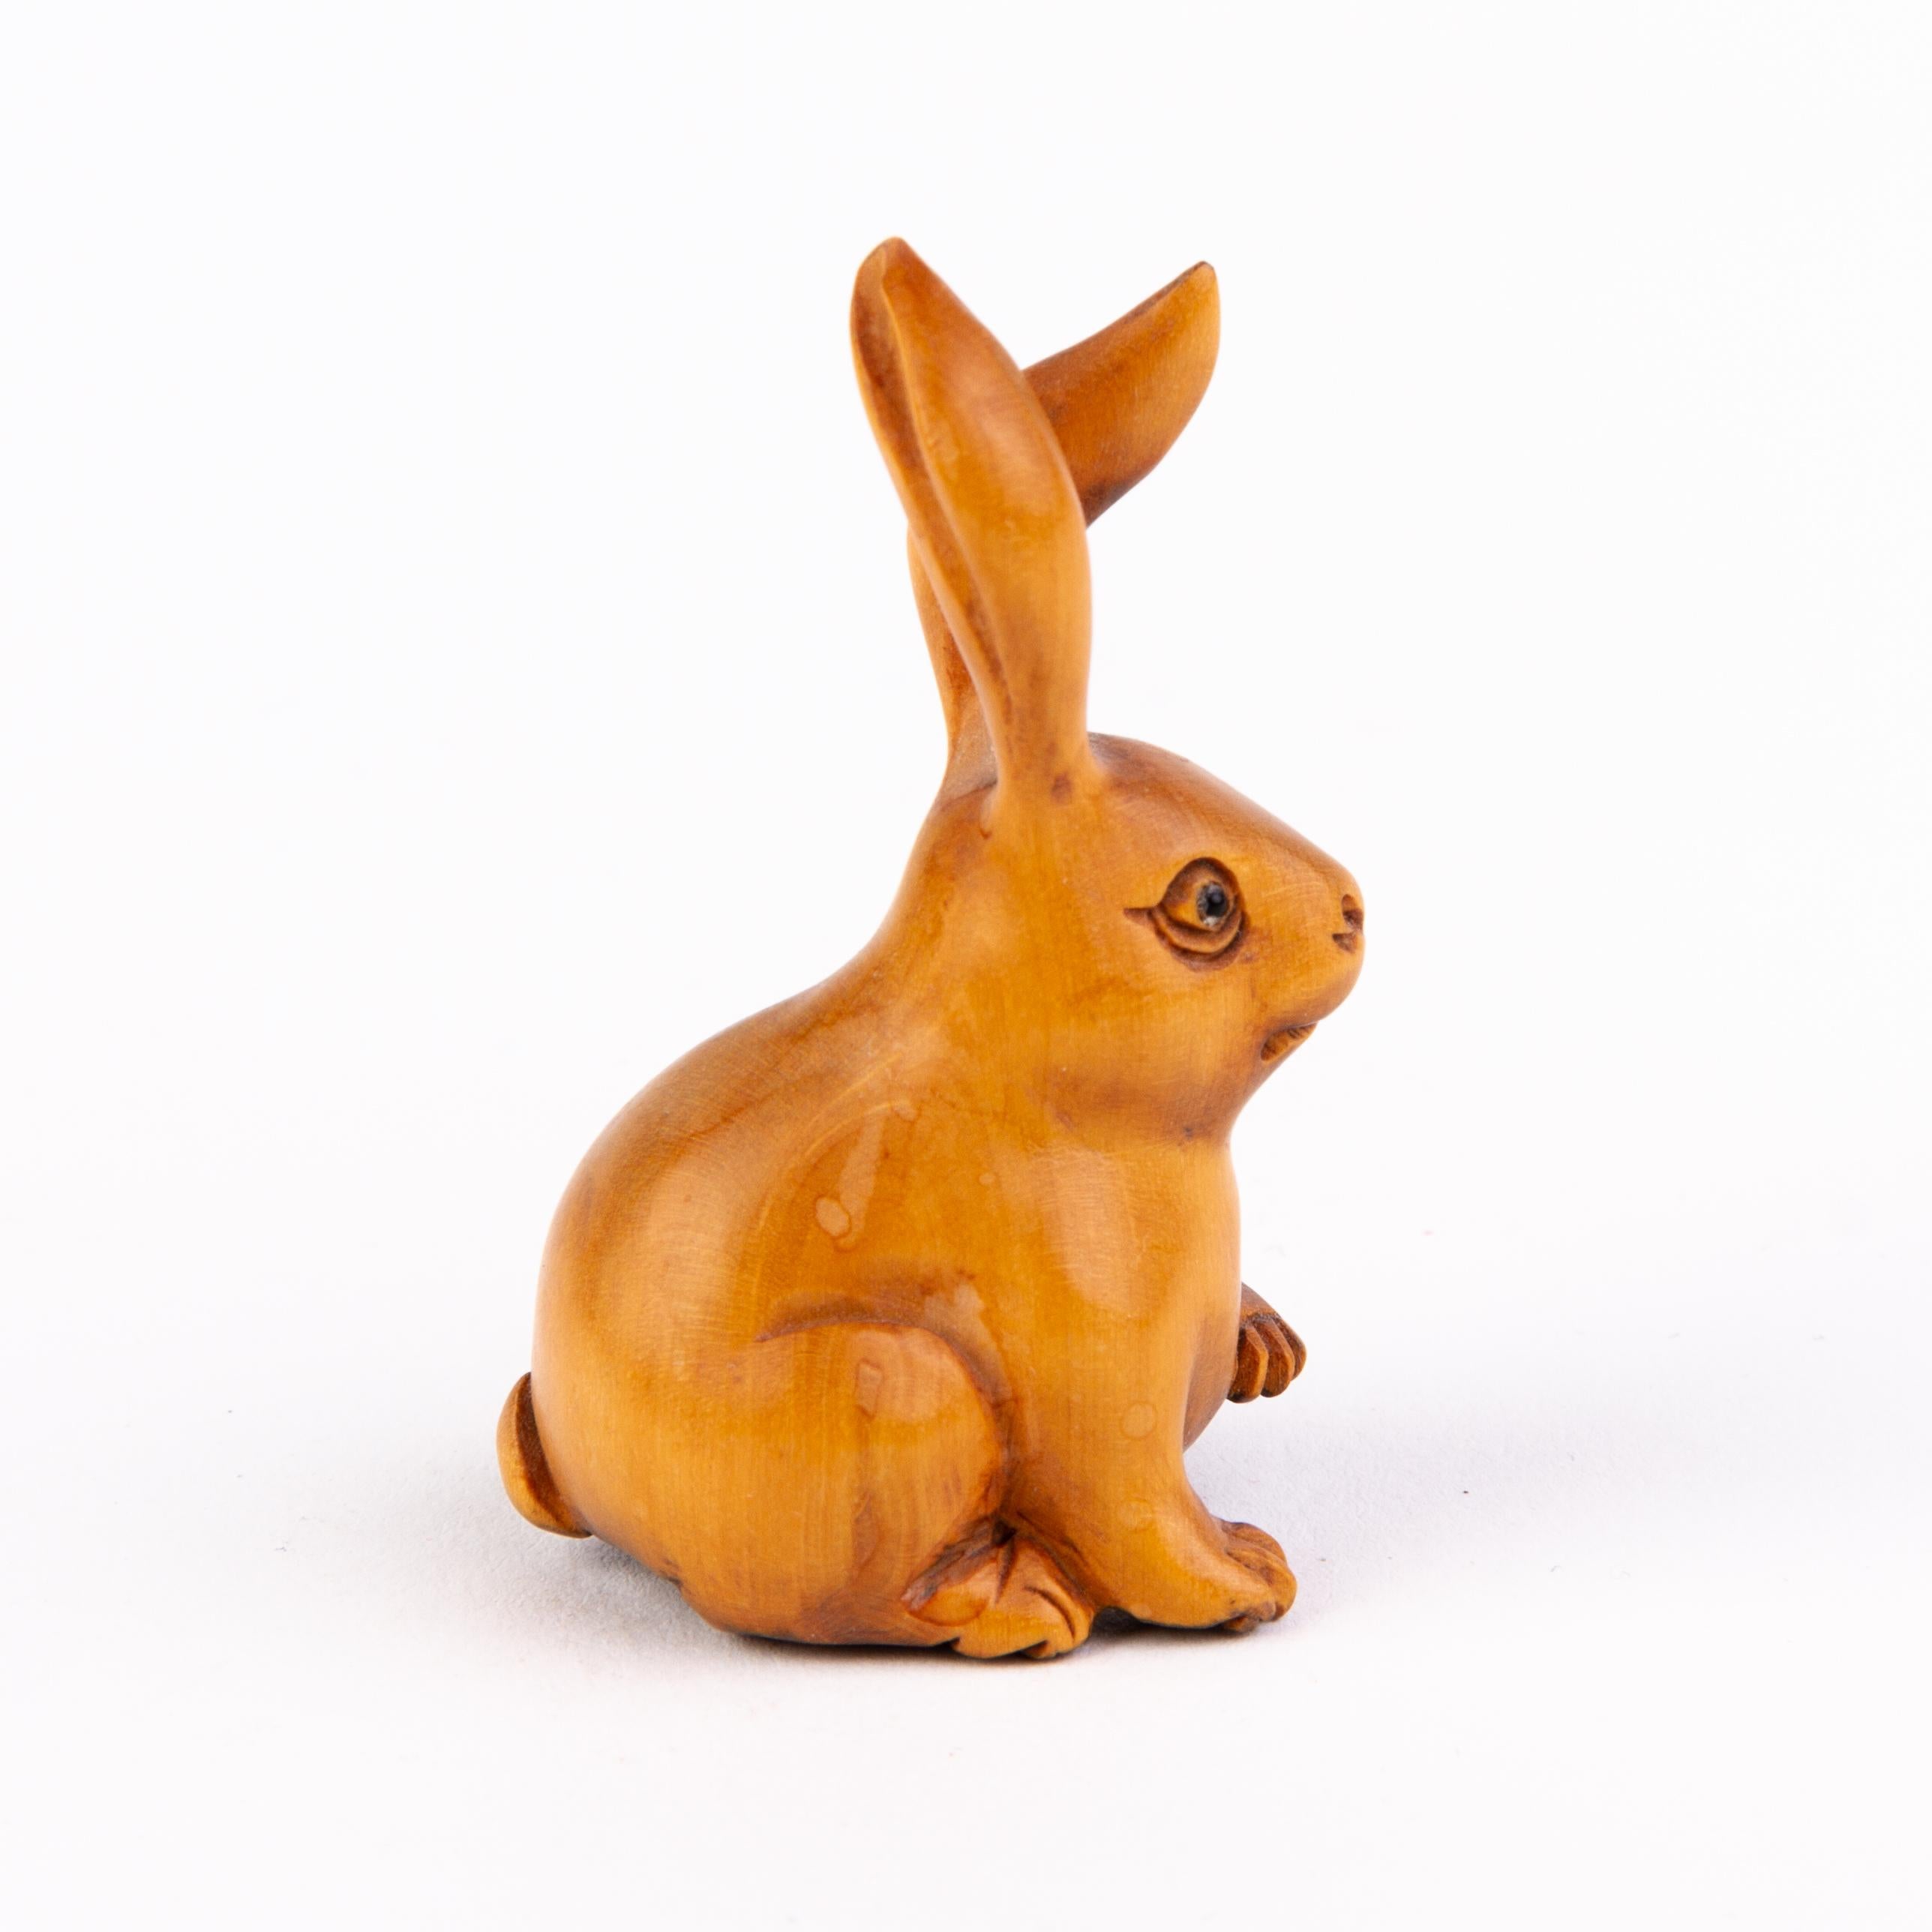 In good condition
From a private collection
Free international shipping
Signed Japanese Boxwood Netsuke Inro of a Bunny Rabbit